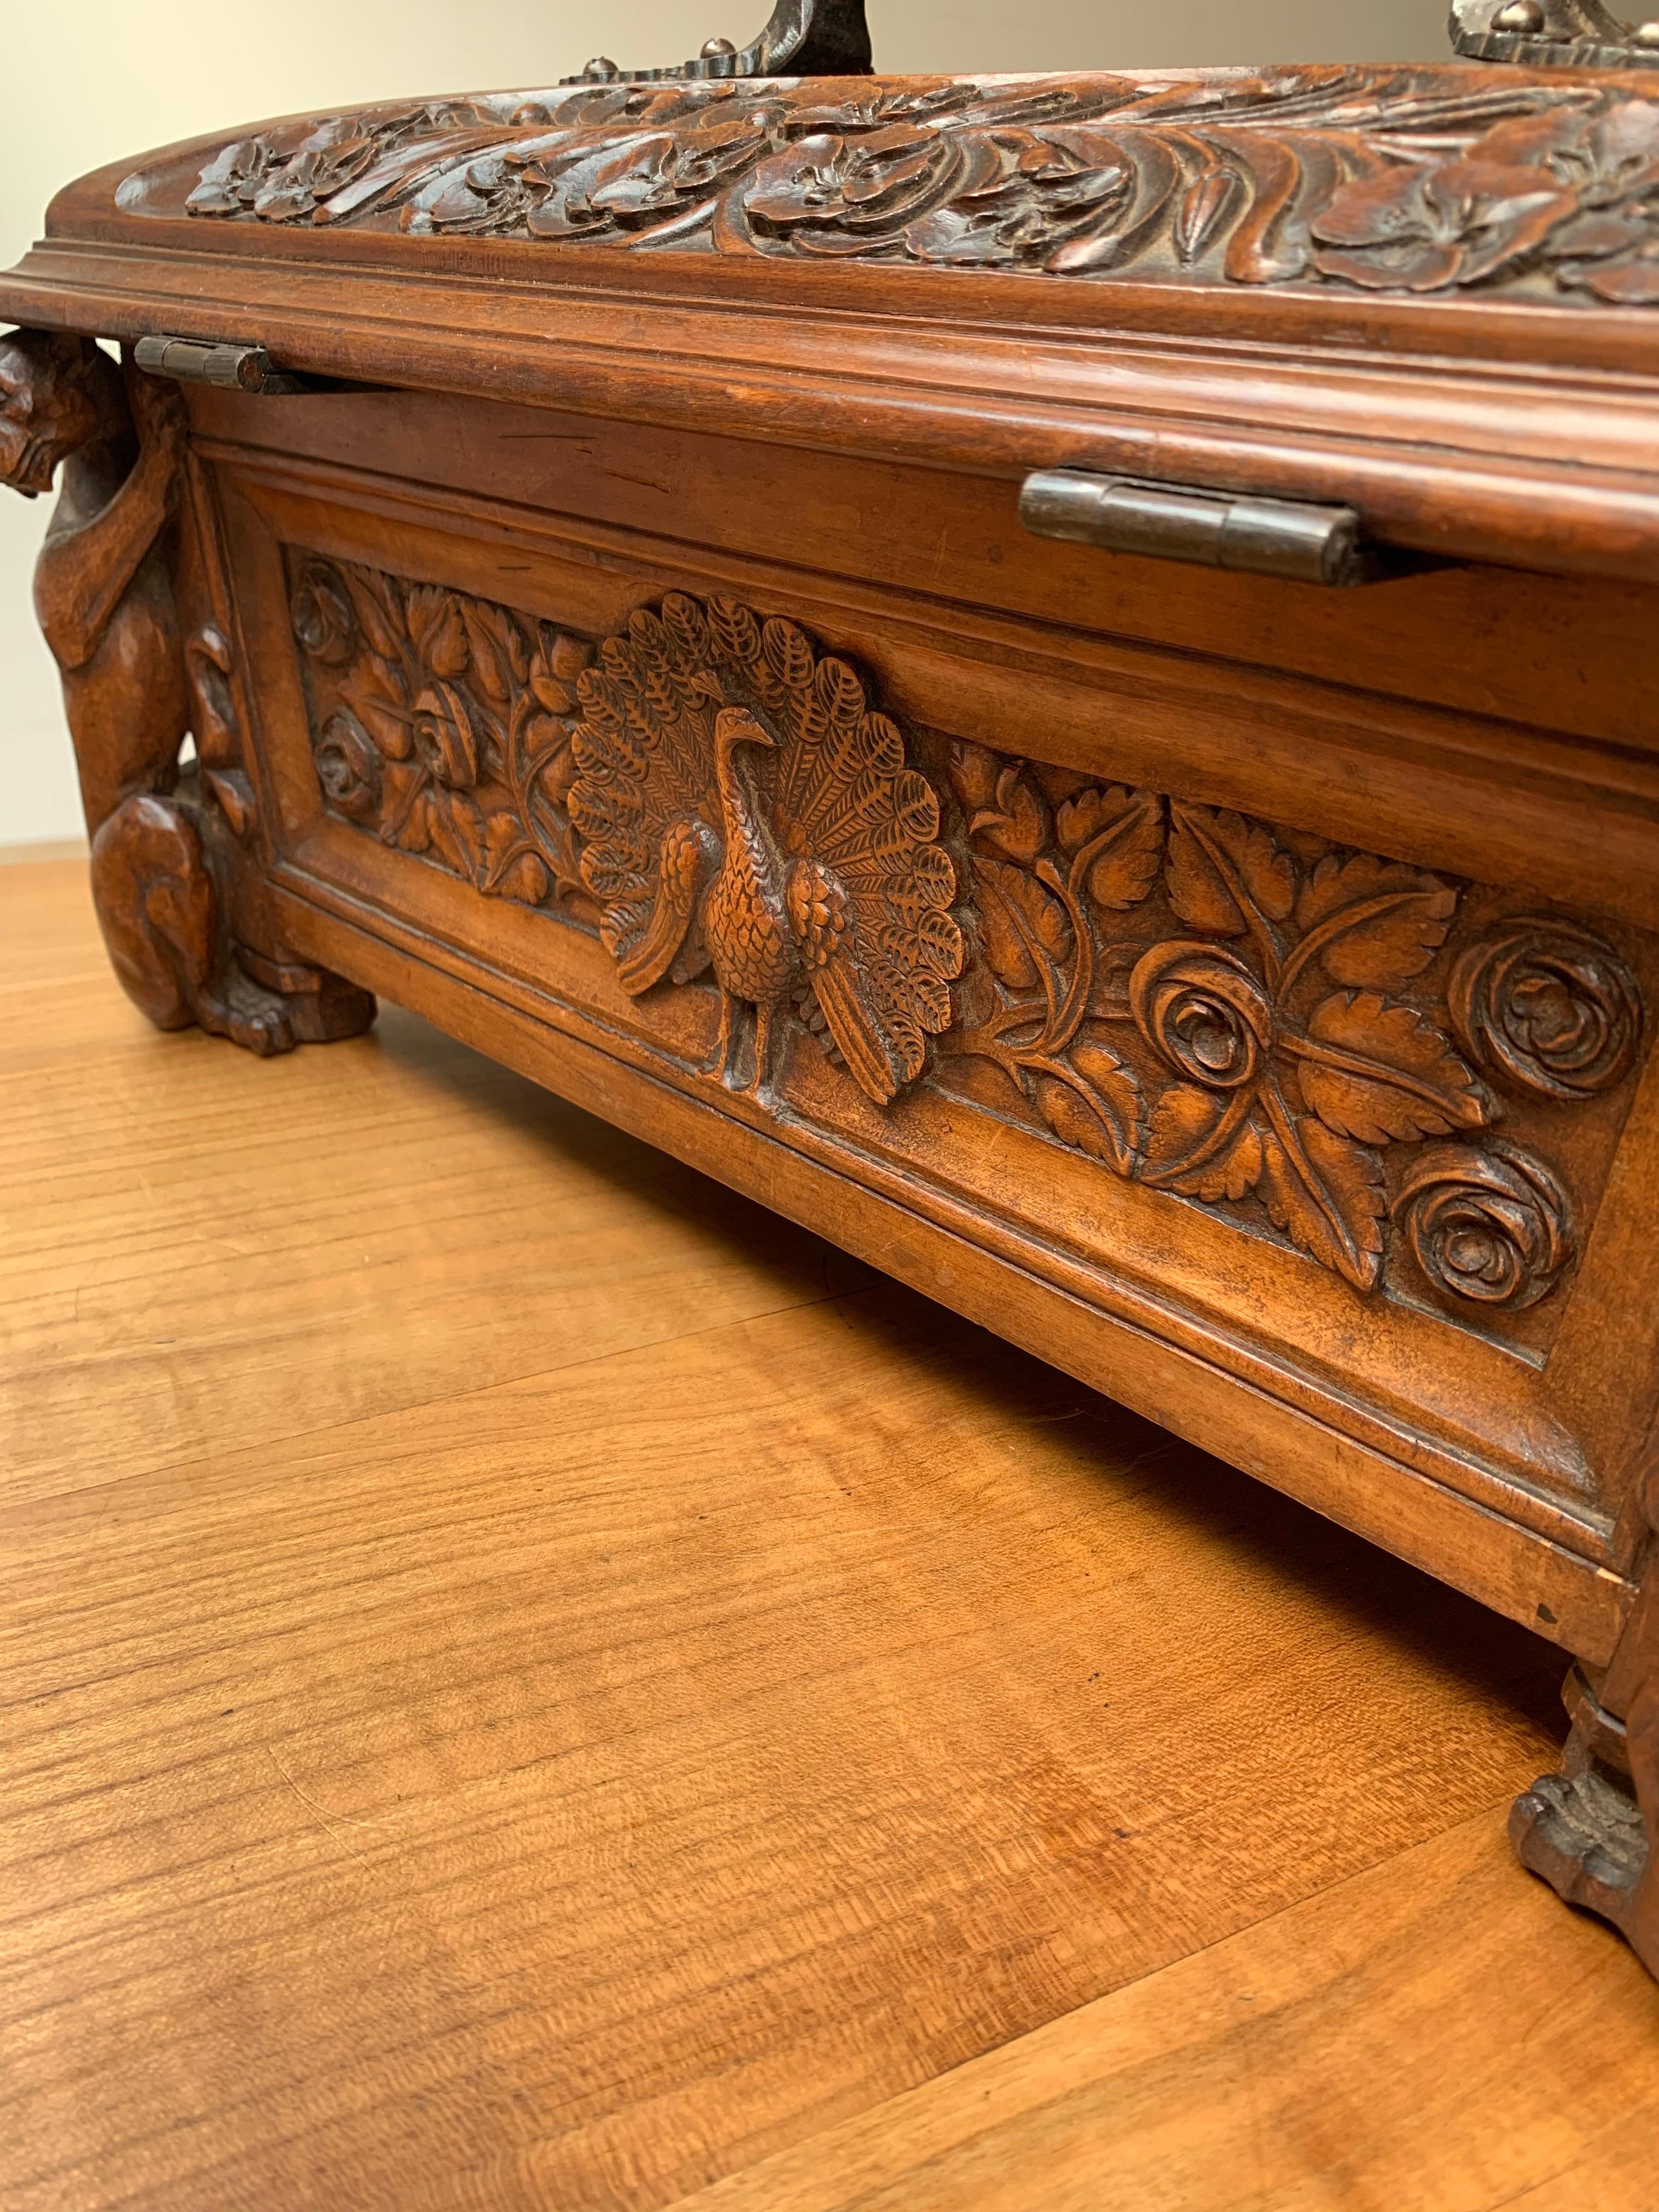 Stunning Handcrafted Late 1800s Gothic Casket with Peacock & Gargoyle Sculptures For Sale 7